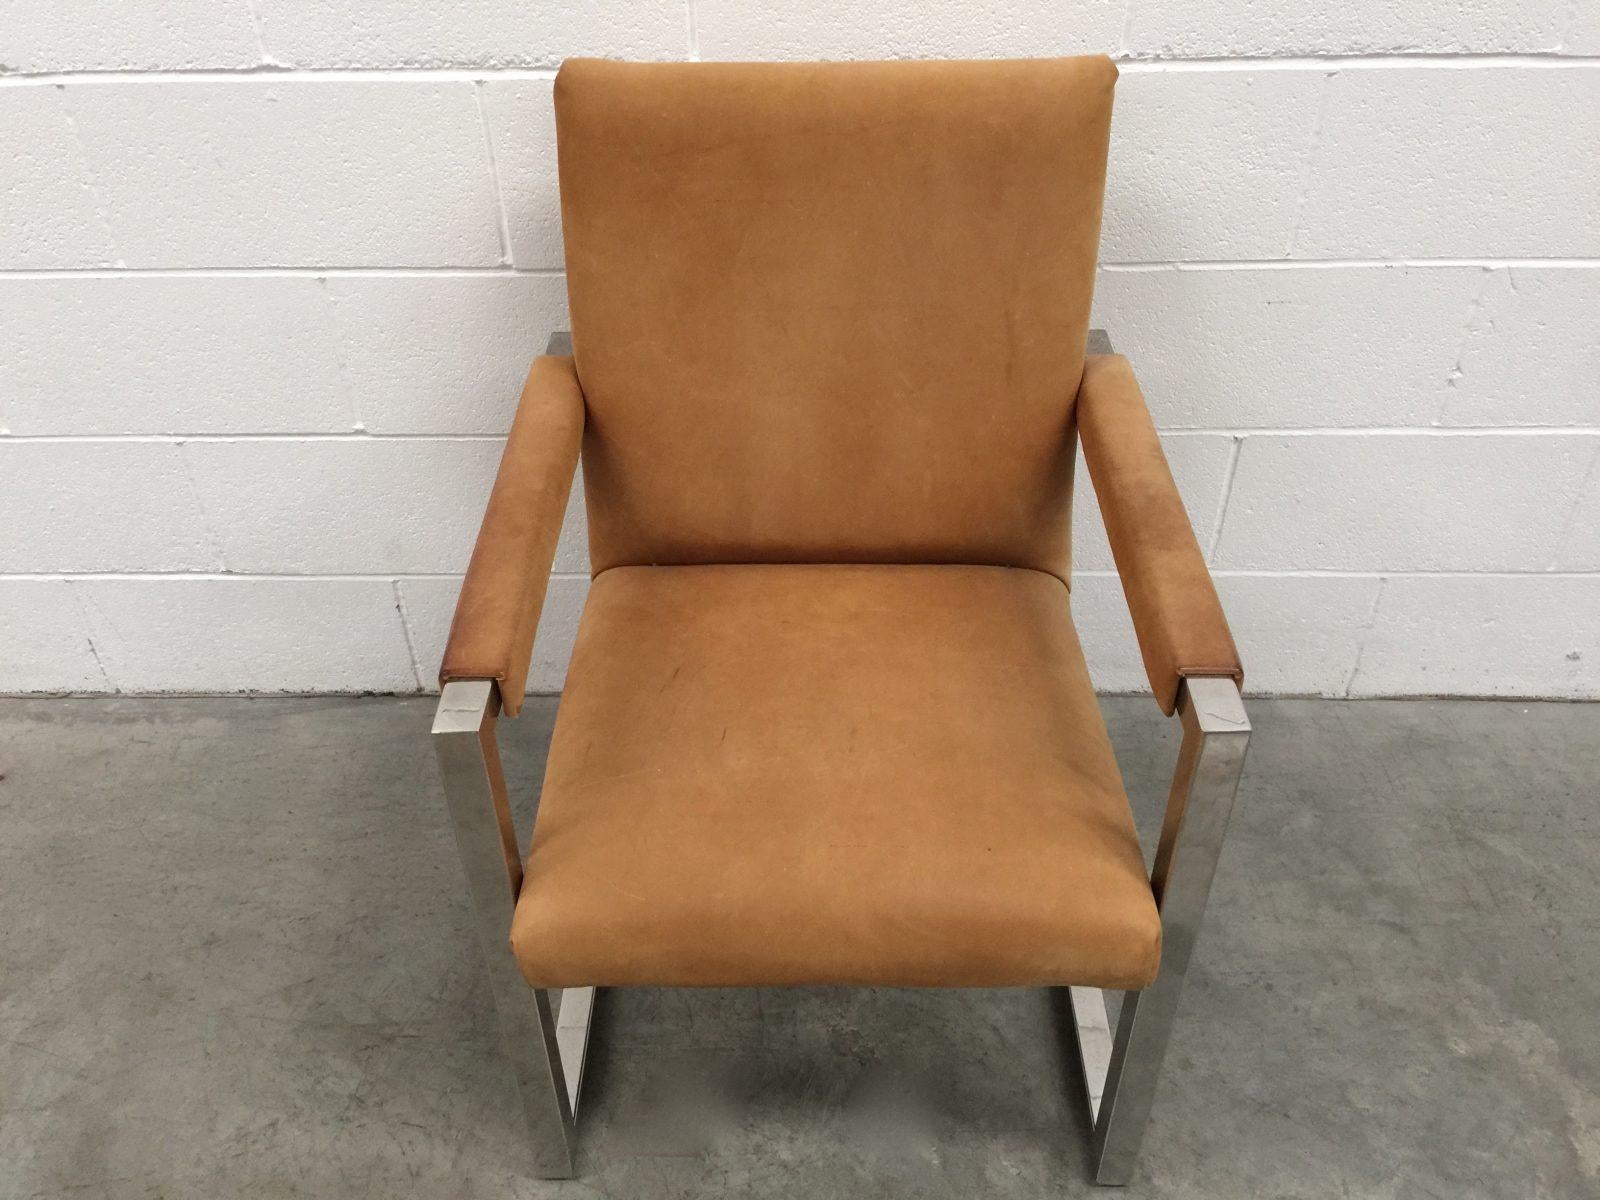 Contemporary Sublime Ralph Lauren “Polo” Square Armchair in Tan Suede & Chrome For Sale